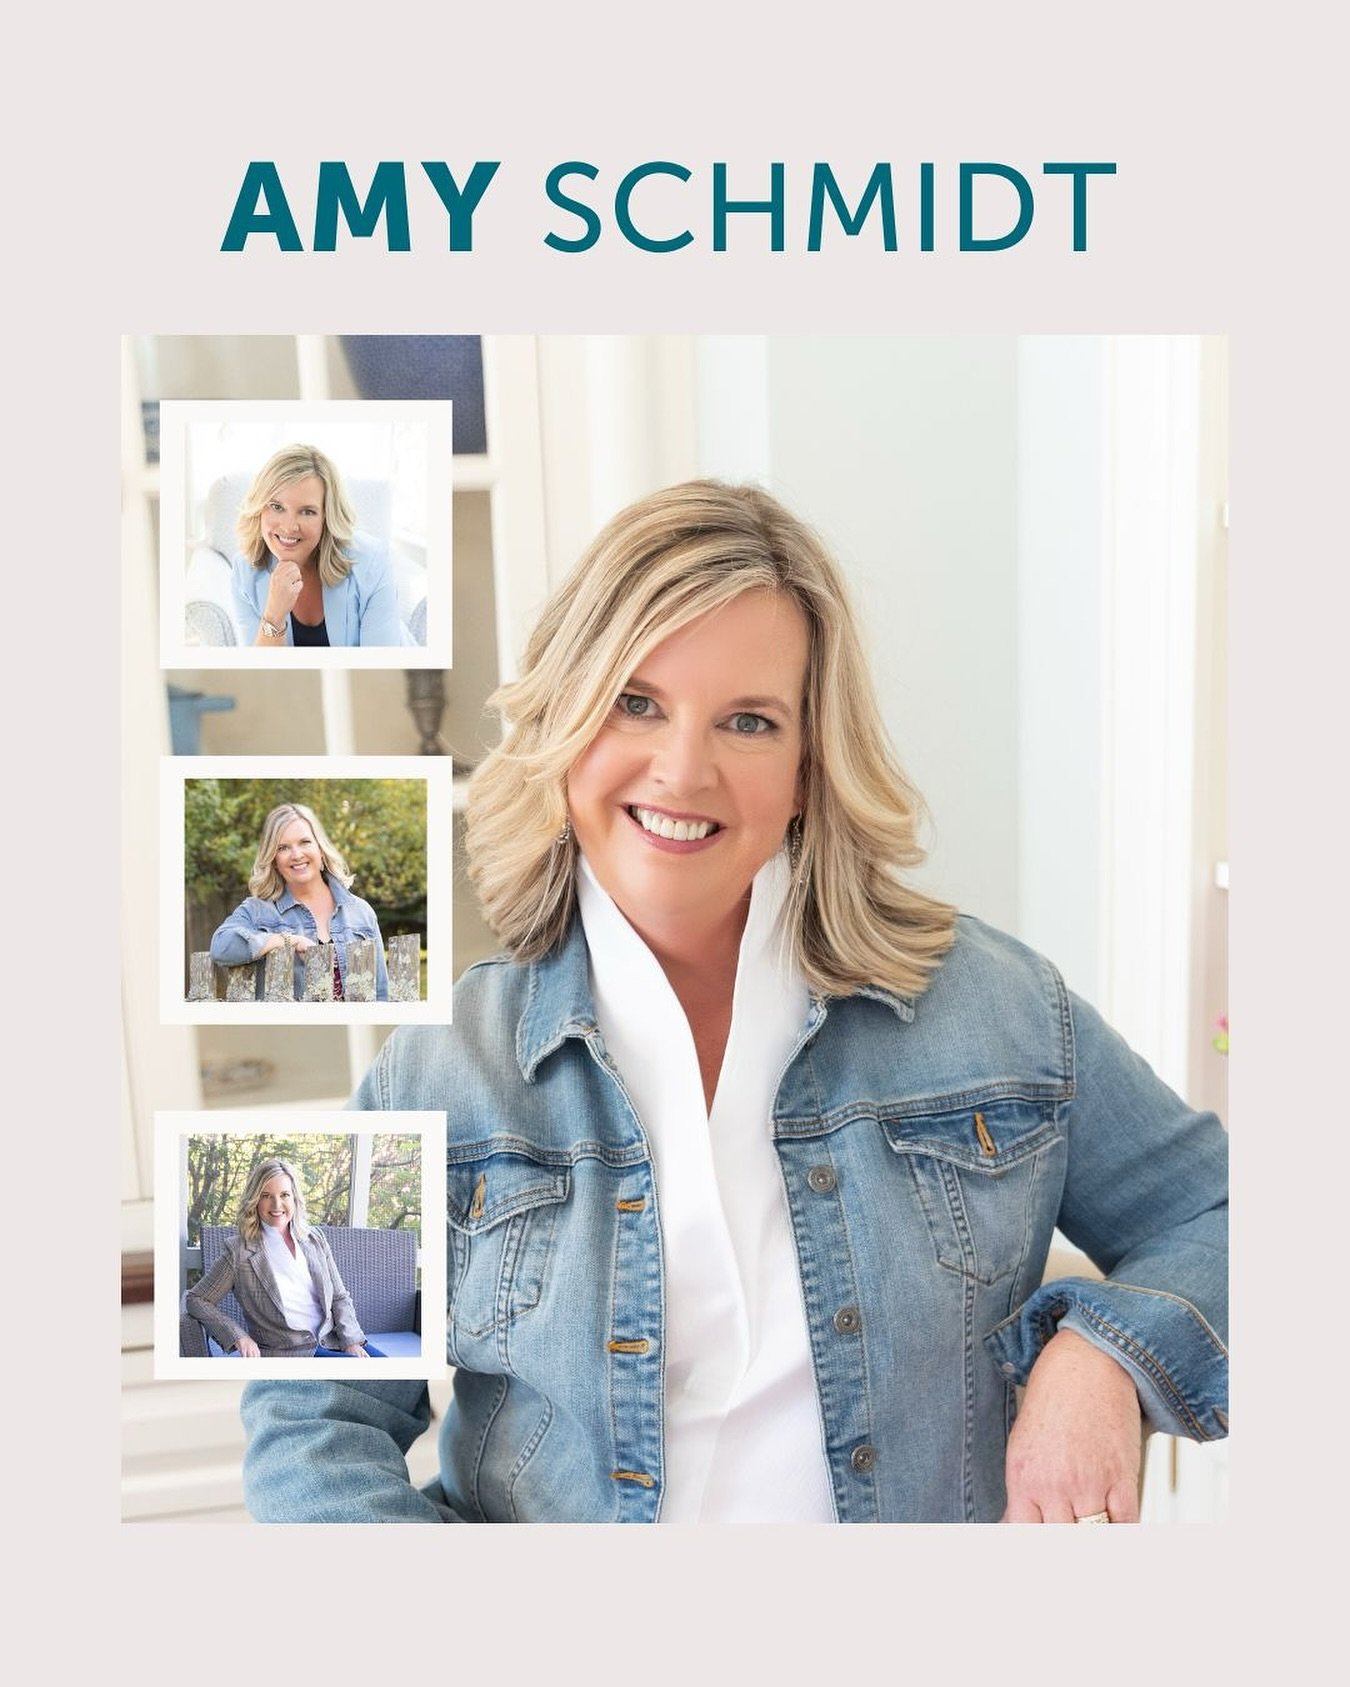 🌟 We&rsquo;re thrilled to announce our client, Amy Schmidt! 🌟 

Amy inspires and empowers women to embrace their journey with courage and authenticity. As a sought-after speaker, TEDx speaker, and award-winning author, Amy&rsquo;s voice resonates w